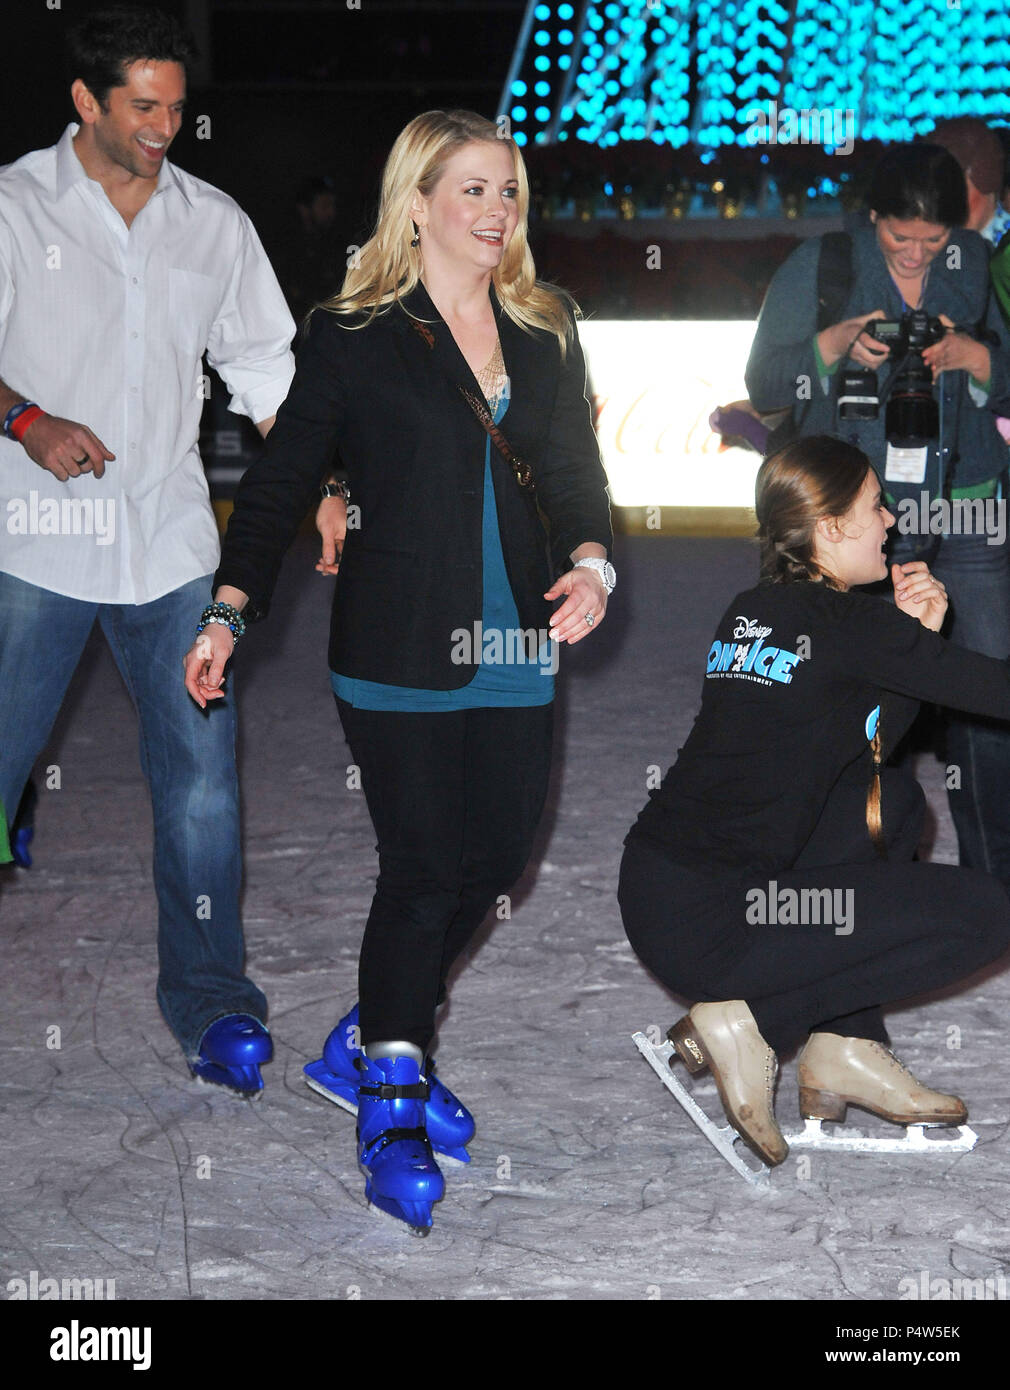 Melissa Joan Hart at Toy Story 3 On Ice To benefit the Children Hospital at the Nokia Ice Skating in Los Angeles.a Melissa Joan Hart B  Event in Hollywood Life - California, Red Carpet Event, USA, Film Industry, Celebrities, Photography, Bestof, Arts Culture and Entertainment, Topix Celebrities fashion, Best of, Hollywood Life, Event in Hollywood Life - California, Red Carpet and backstage, movie celebrities, TV celebrities, Music celebrities, Topix, Bestof, Arts Culture and Entertainment, vertical, one person, Photography,   Fashion, full length, 2011 inquiry tsuni@Gamma-USA.com , Credit Tsun Stock Photo